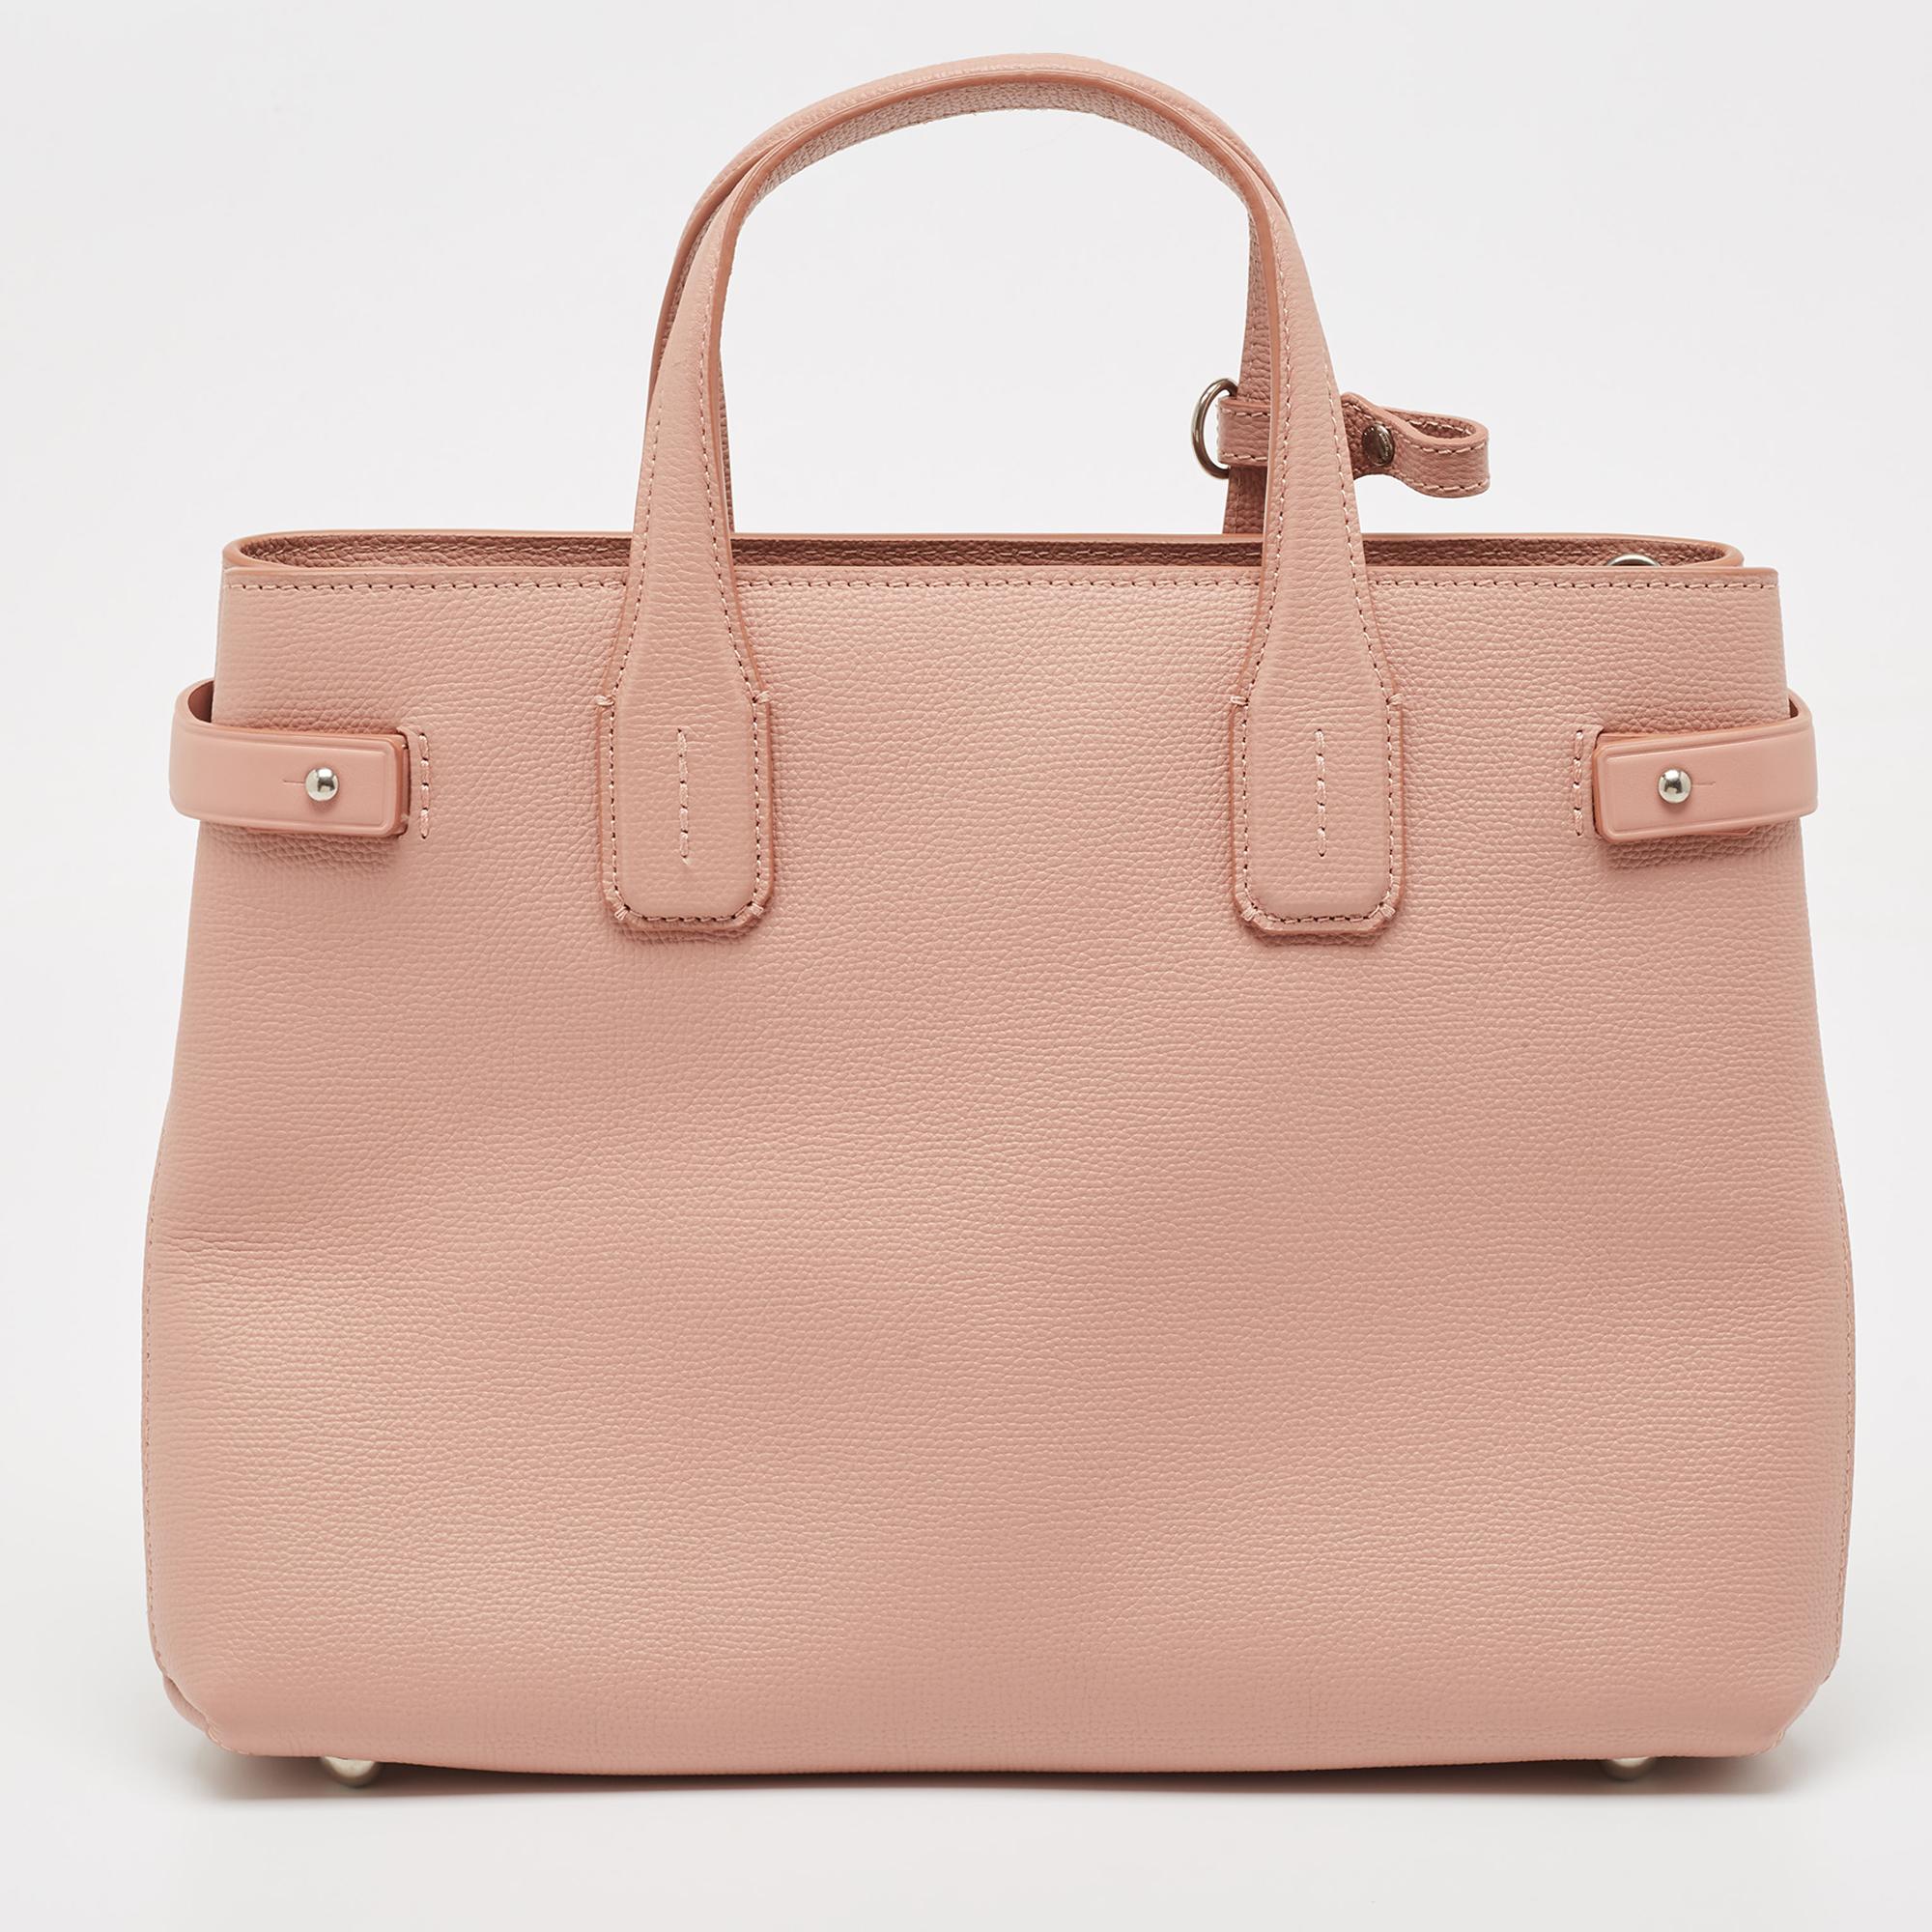 Carry everything you need in style thanks to this Burberry tote. Crafted from House check fabric and leather, it features dual leather handles, an adjustable strap, and a lined interior.

Includes: Branded Dustbag